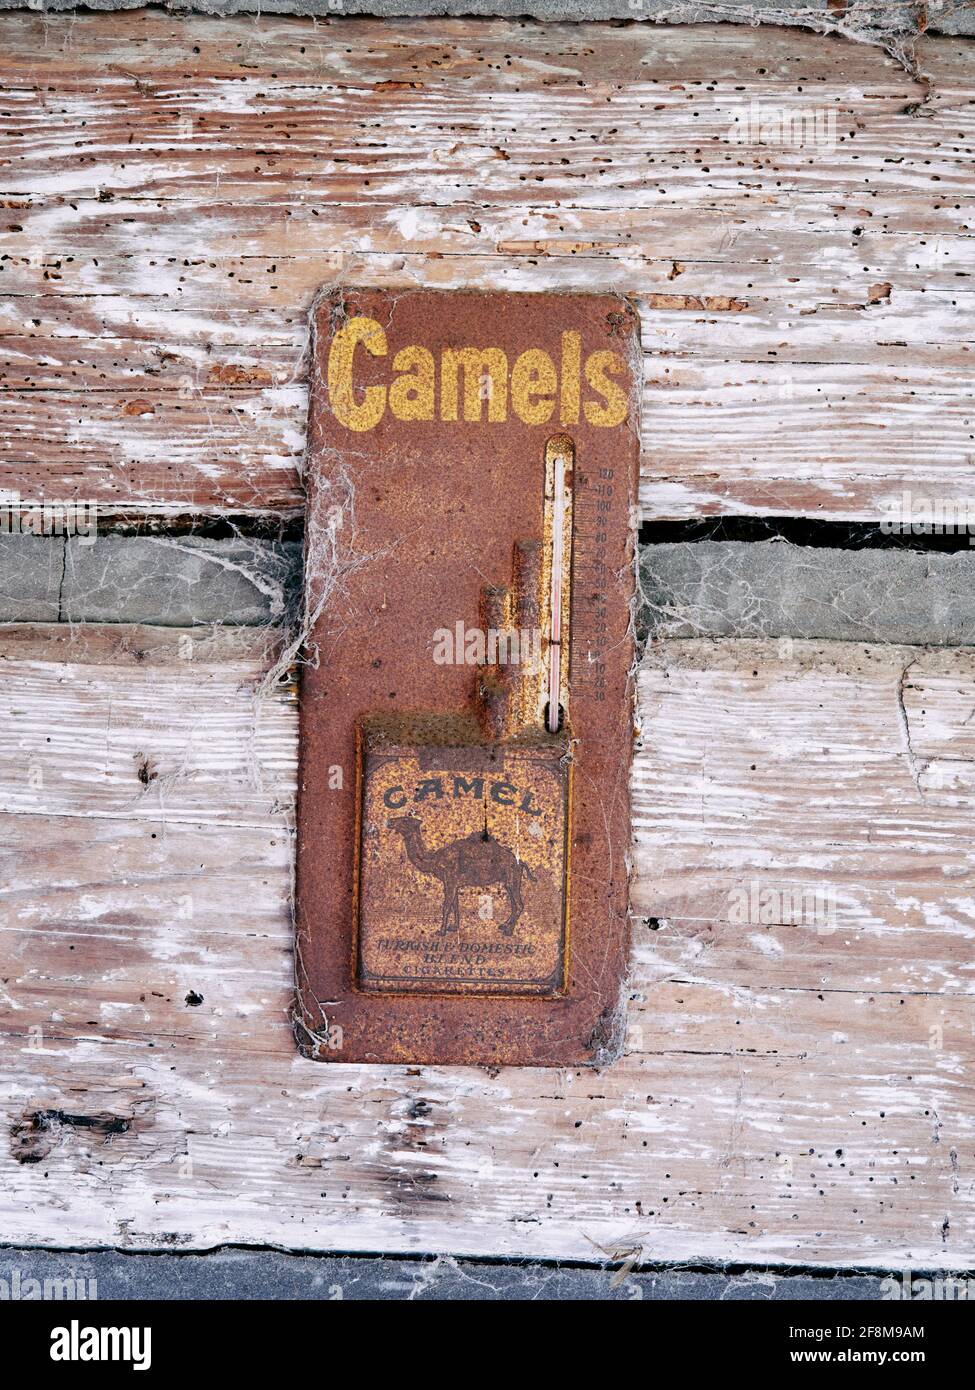 Old vintage rustic antique Camels cigarette advertising on a cabin wall. Stock Photo